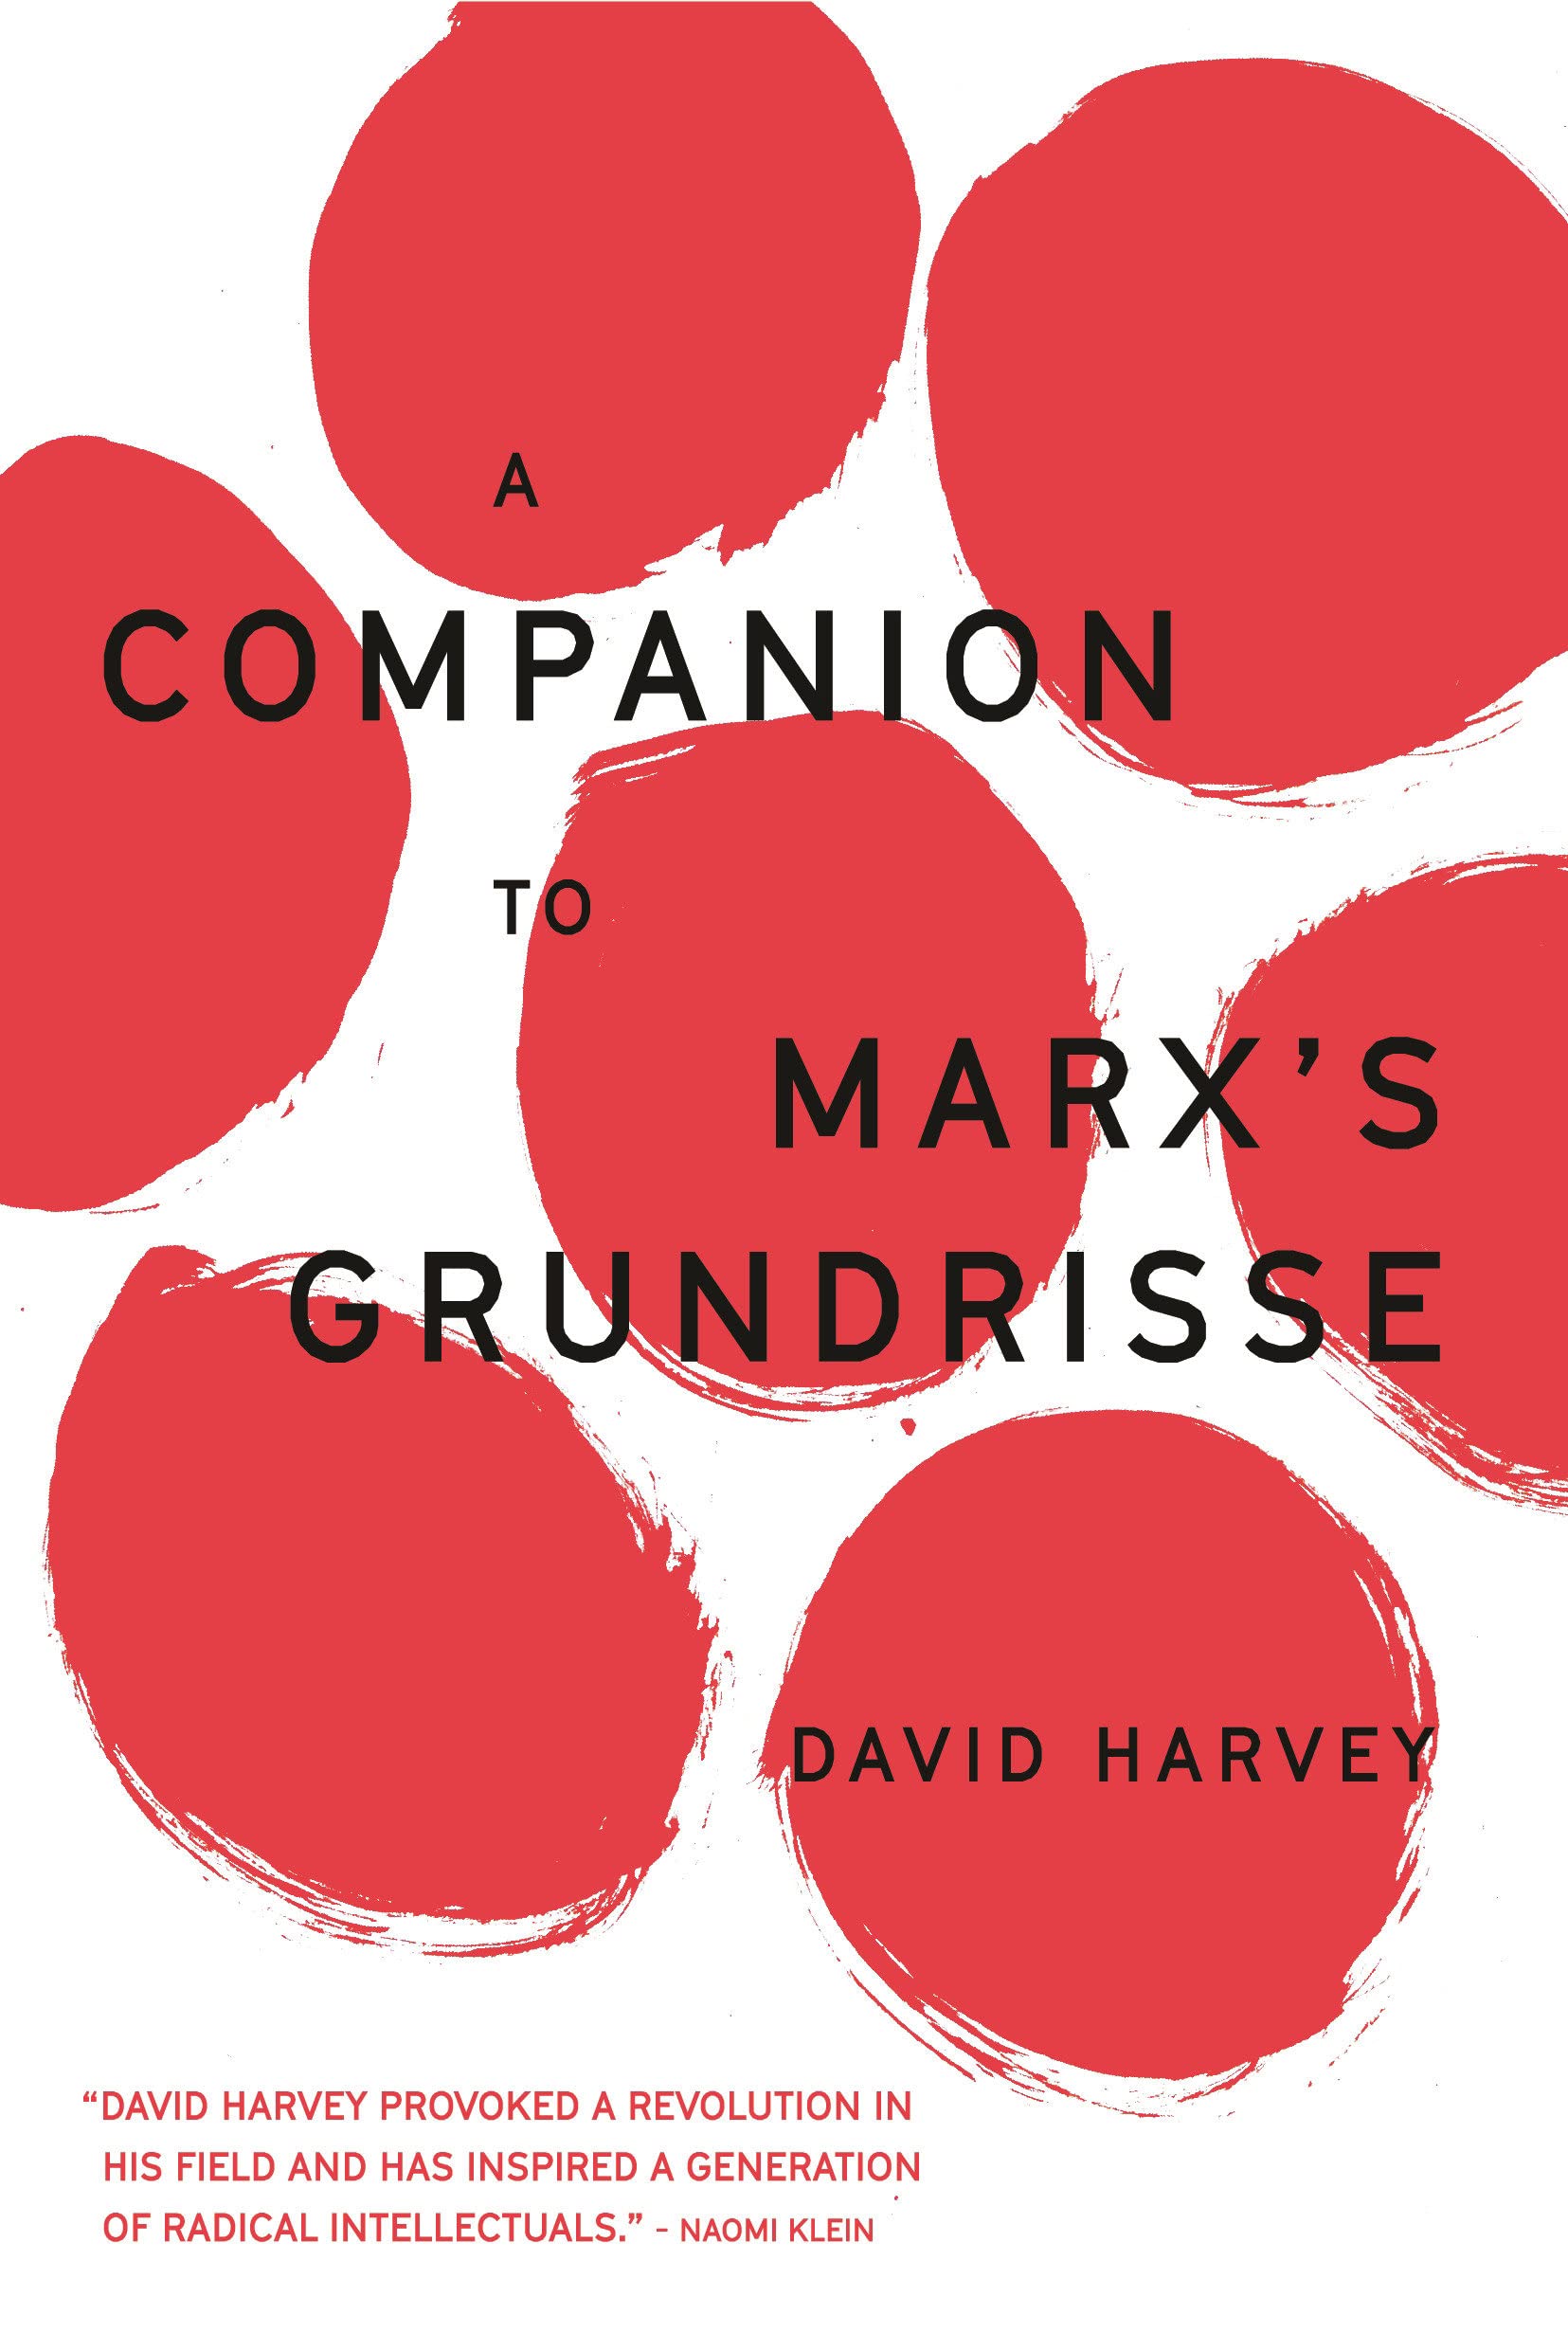 A Companion to Marxs Grundrisse (Paperback)